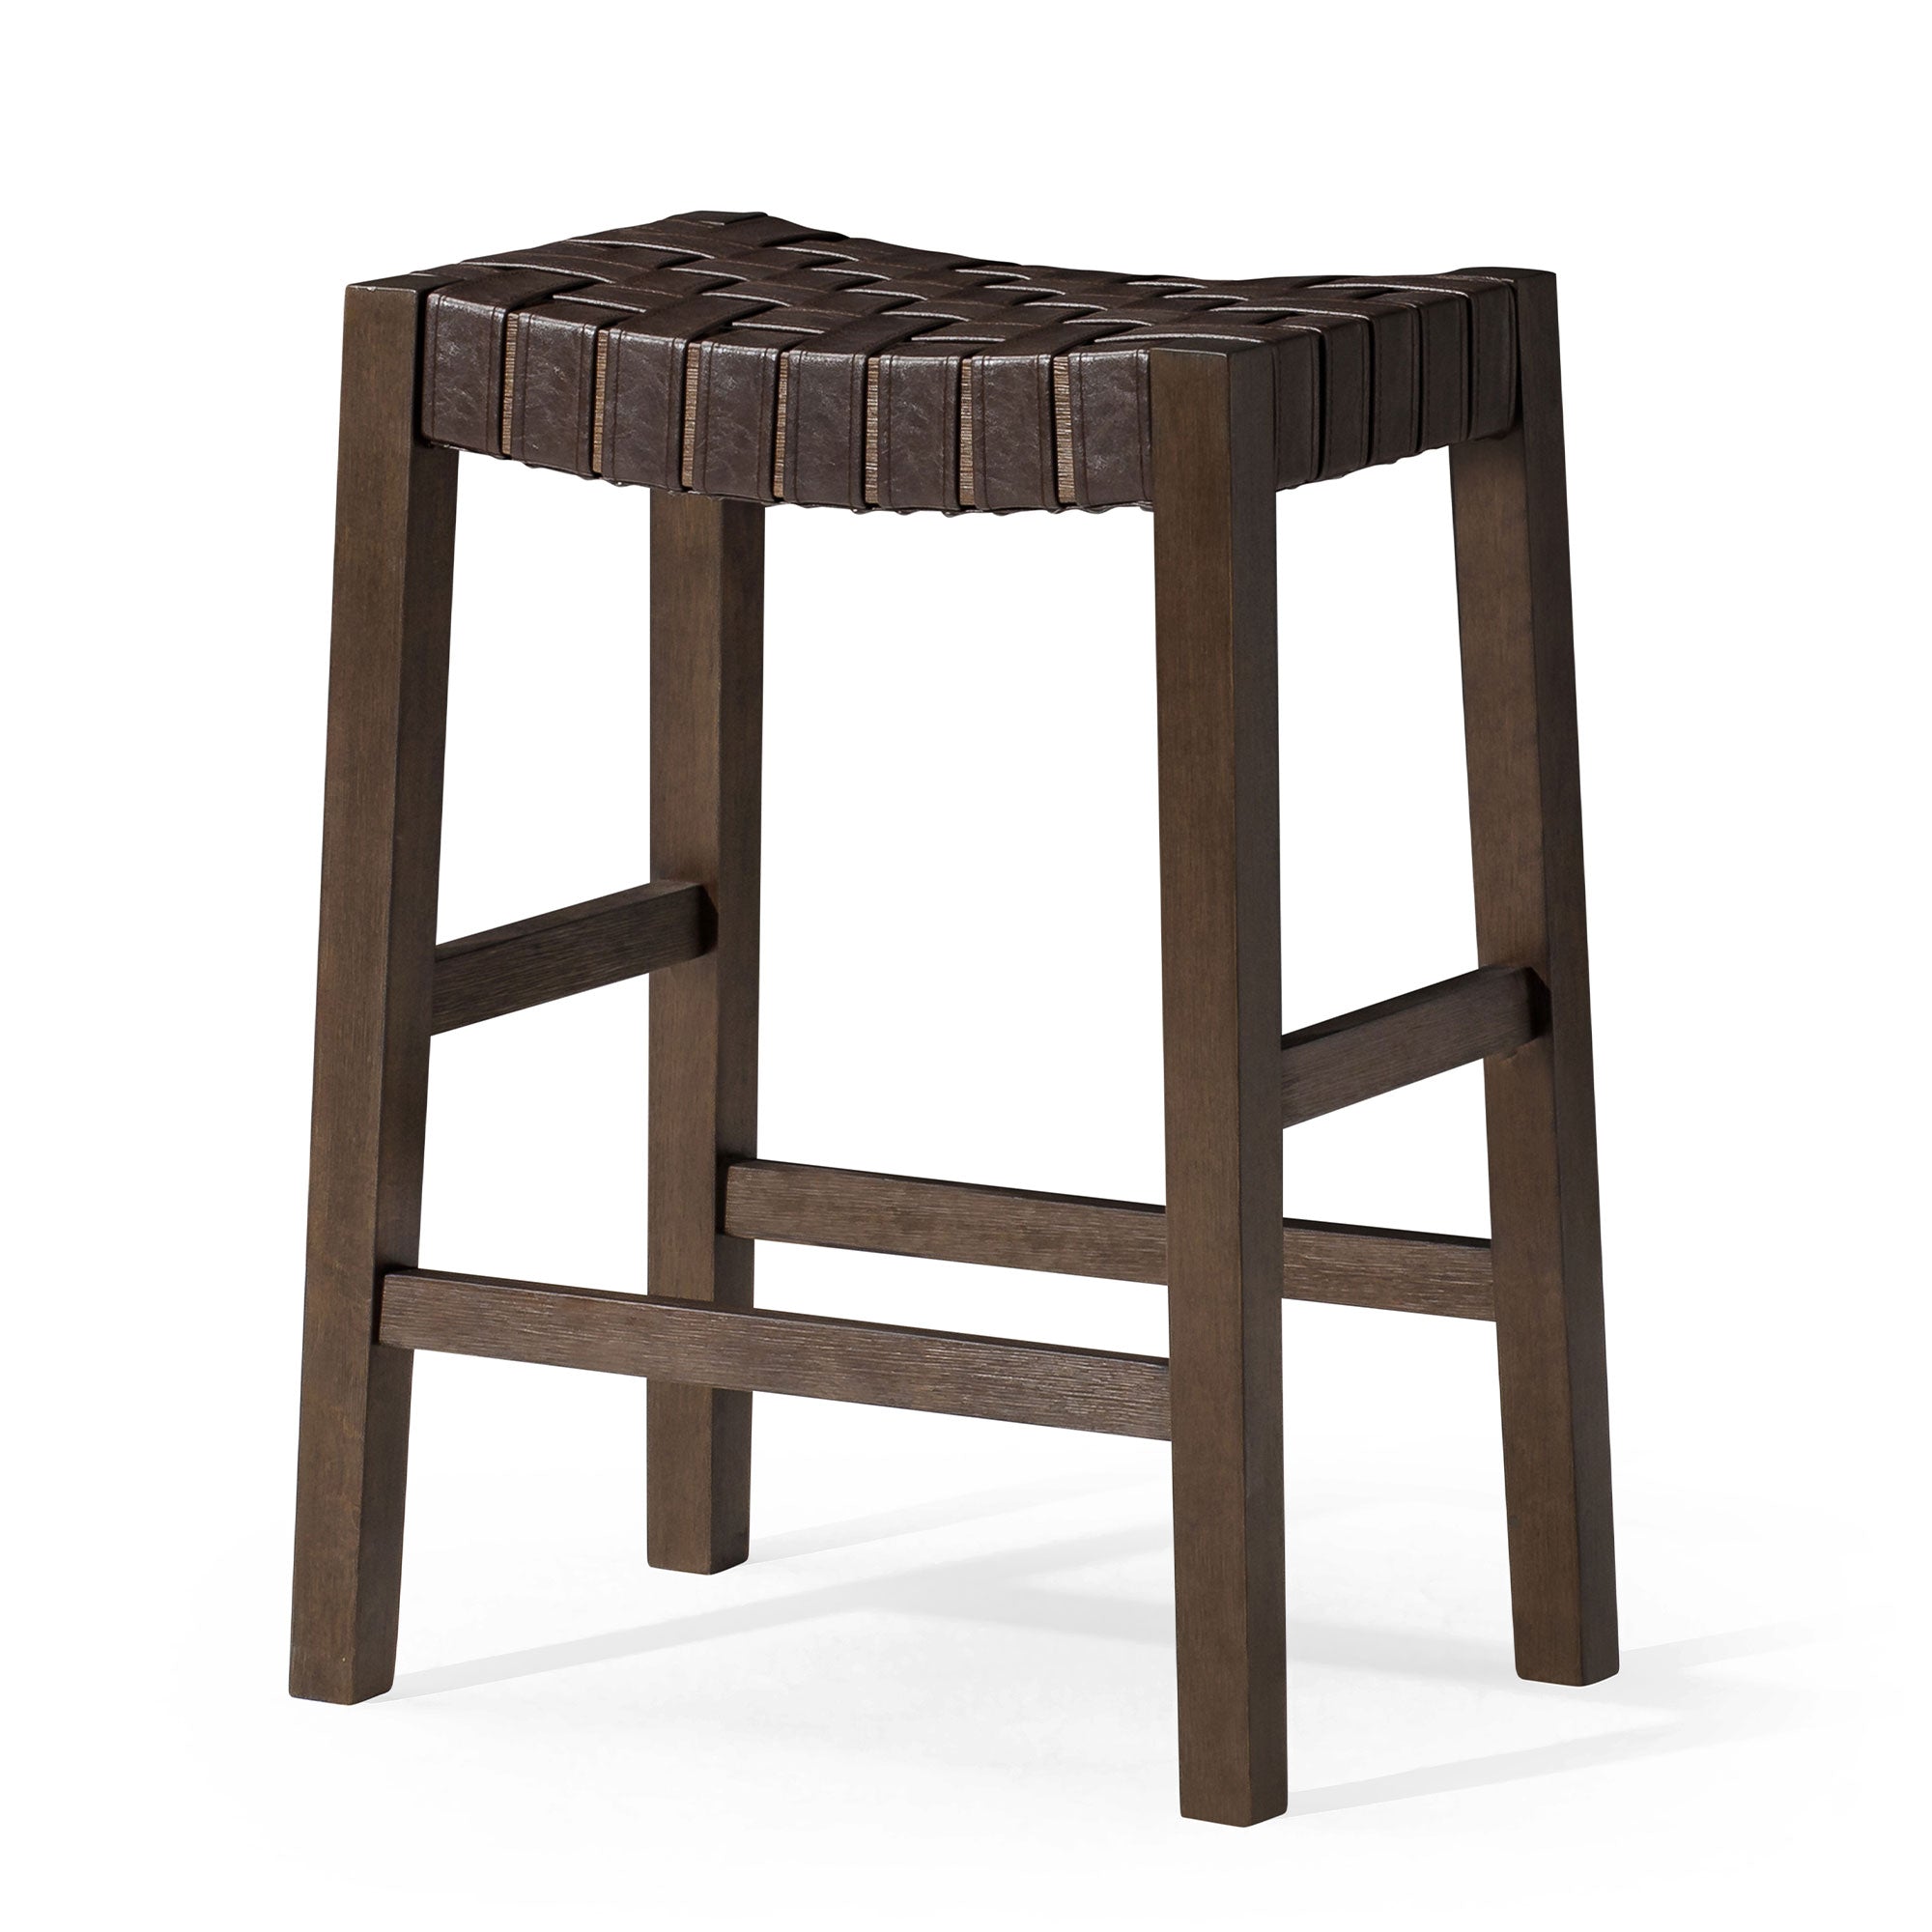 Emerson Counter Stool, Weathered Brown Wood Finish with Marksman Saddle Vegan Leather